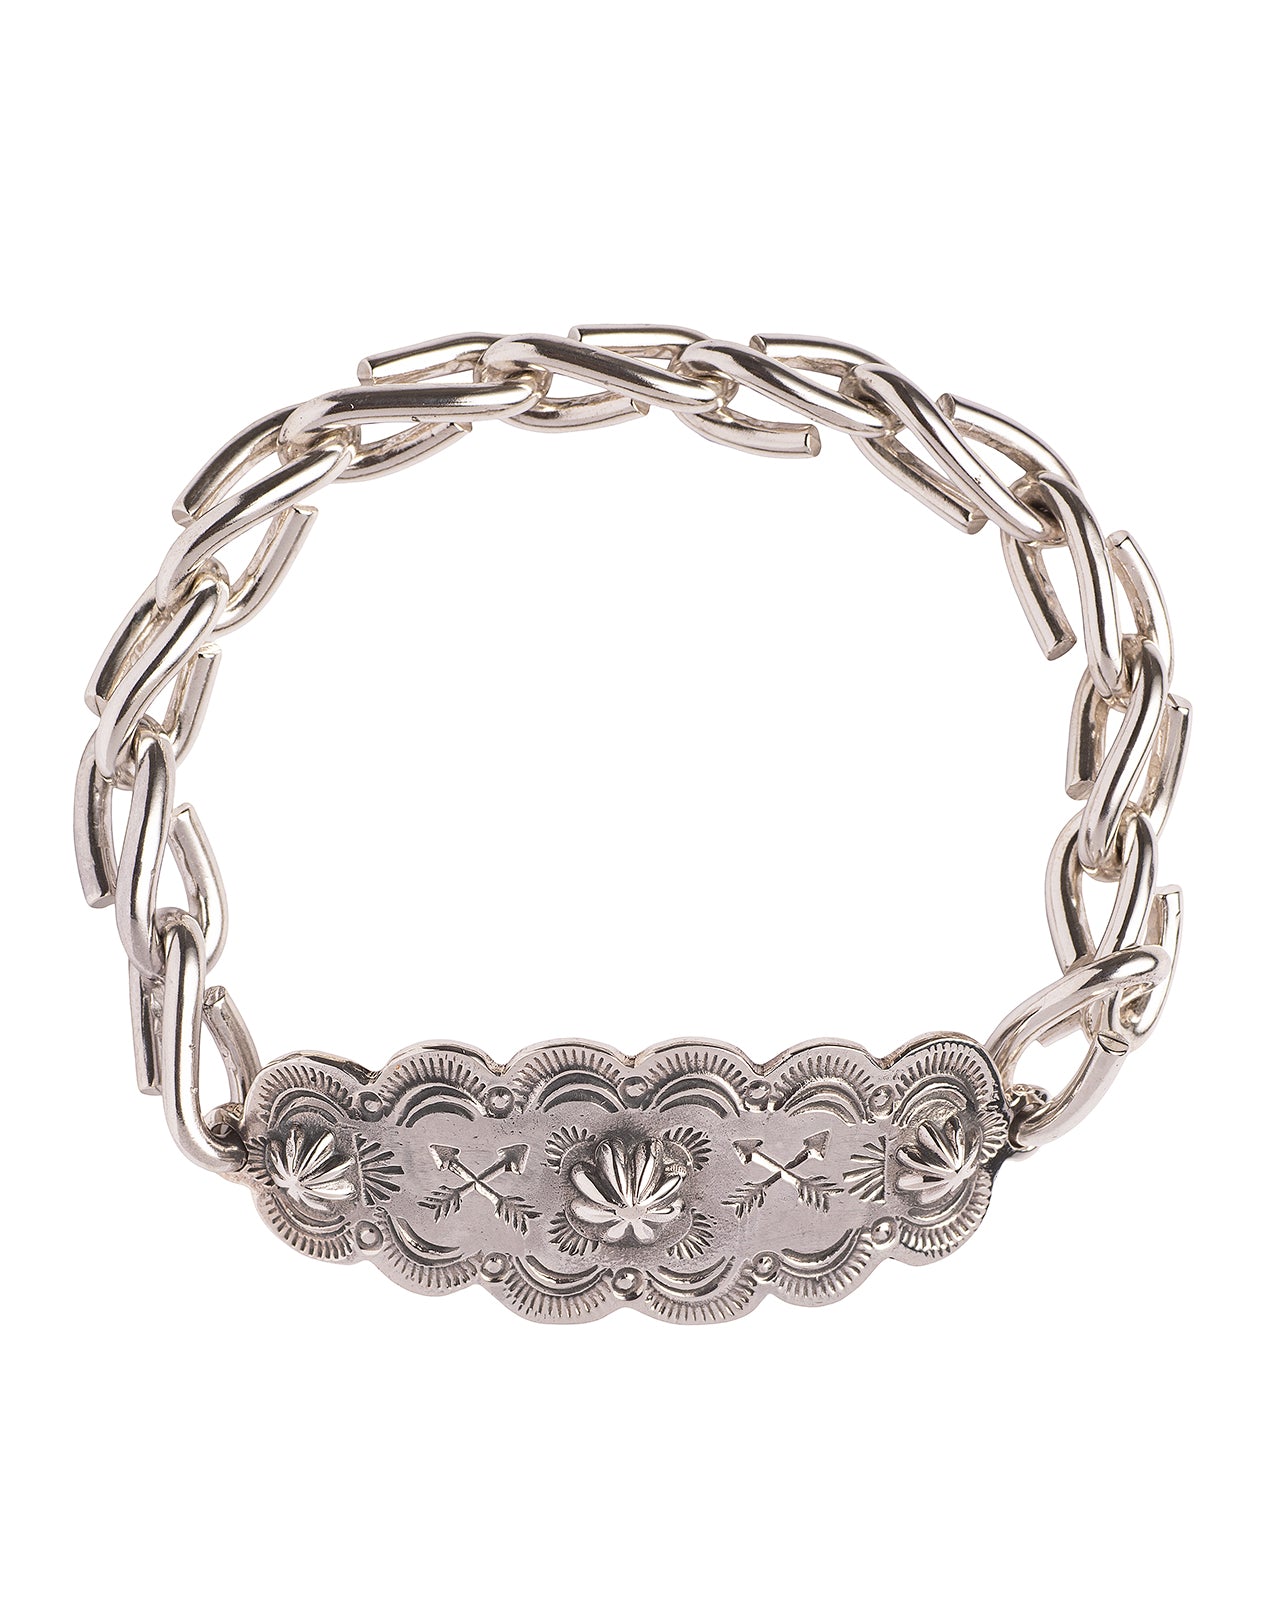 Larry Smith Country Chain Bracelet Shell – Pancho And Lefty